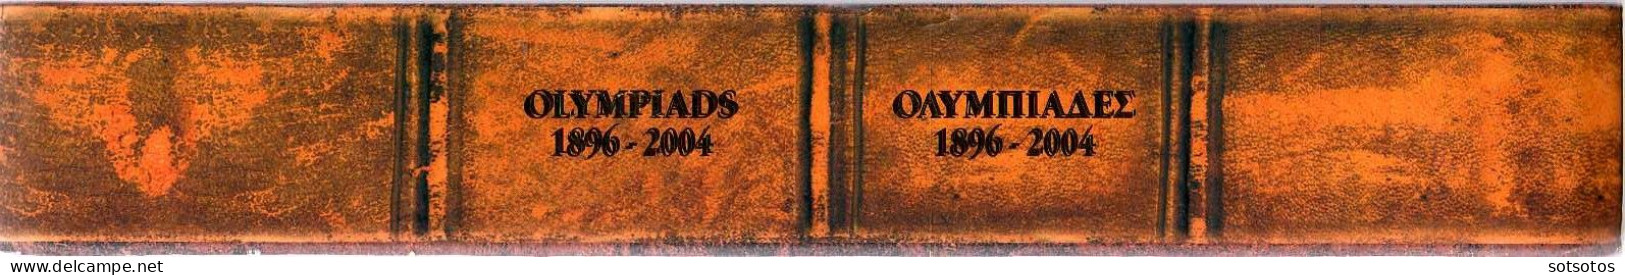 Athens Olympiads 1896-2004 - Books